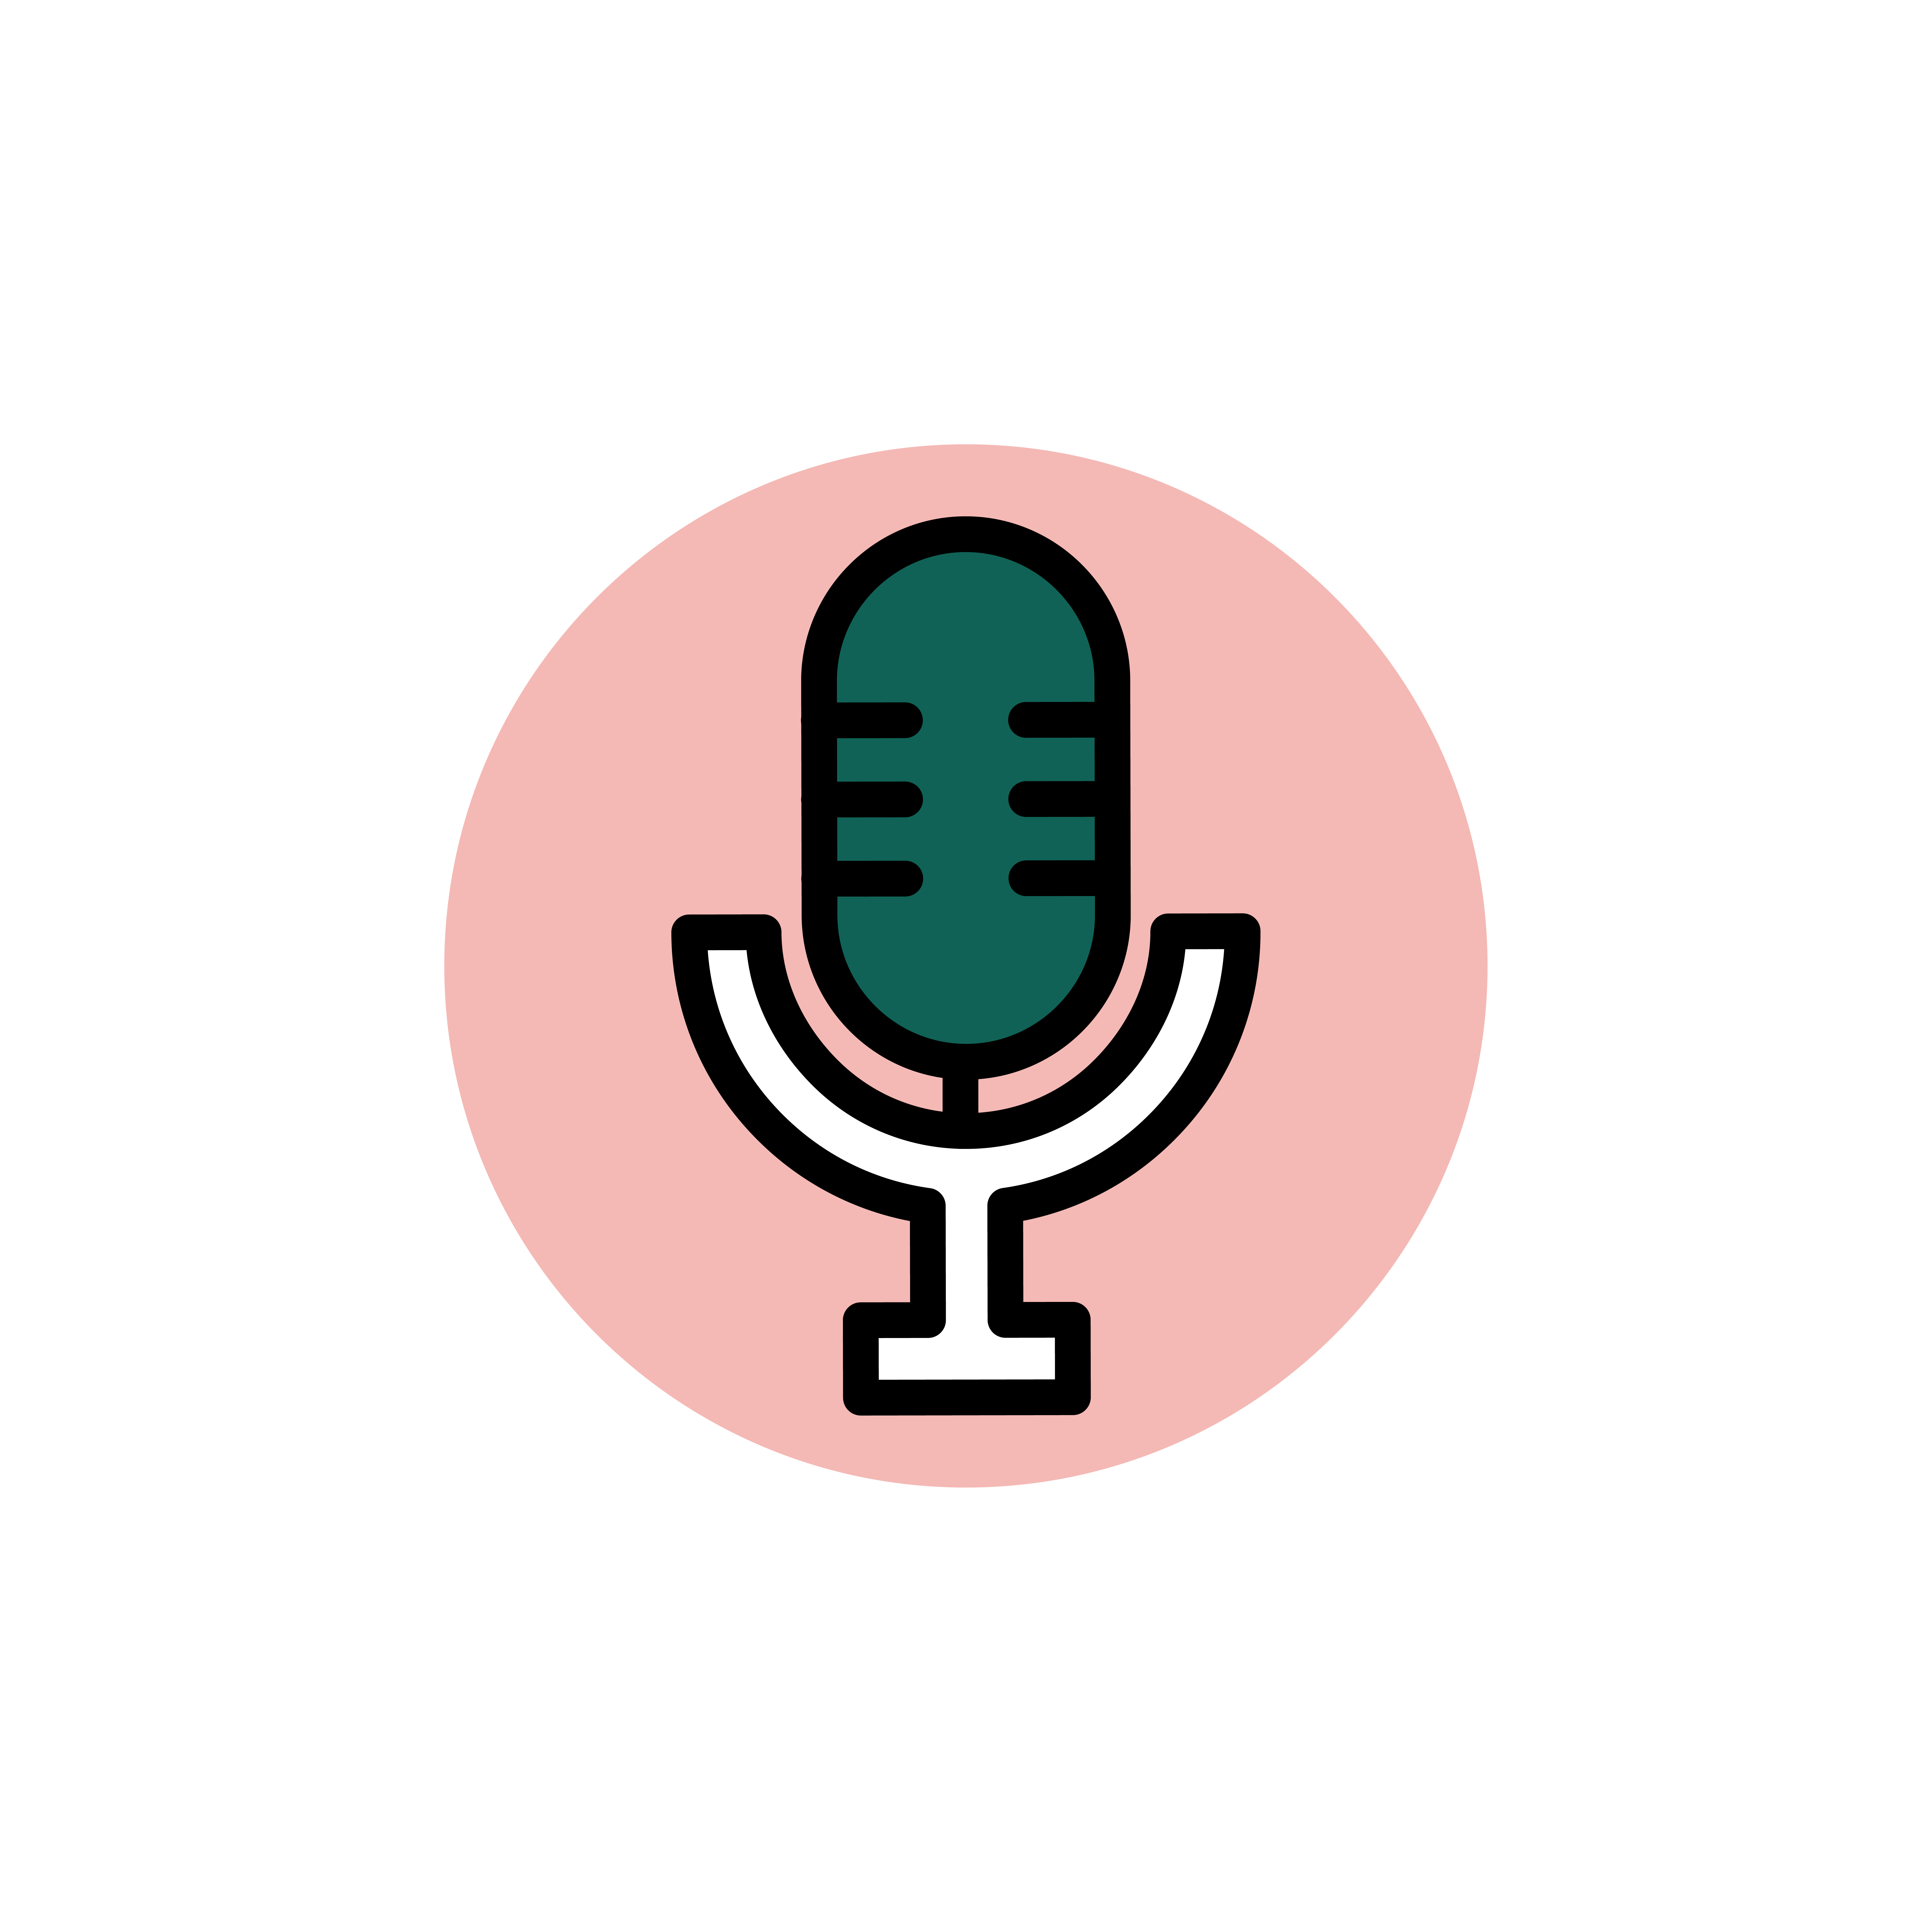 PODCAST_PALM_ICON